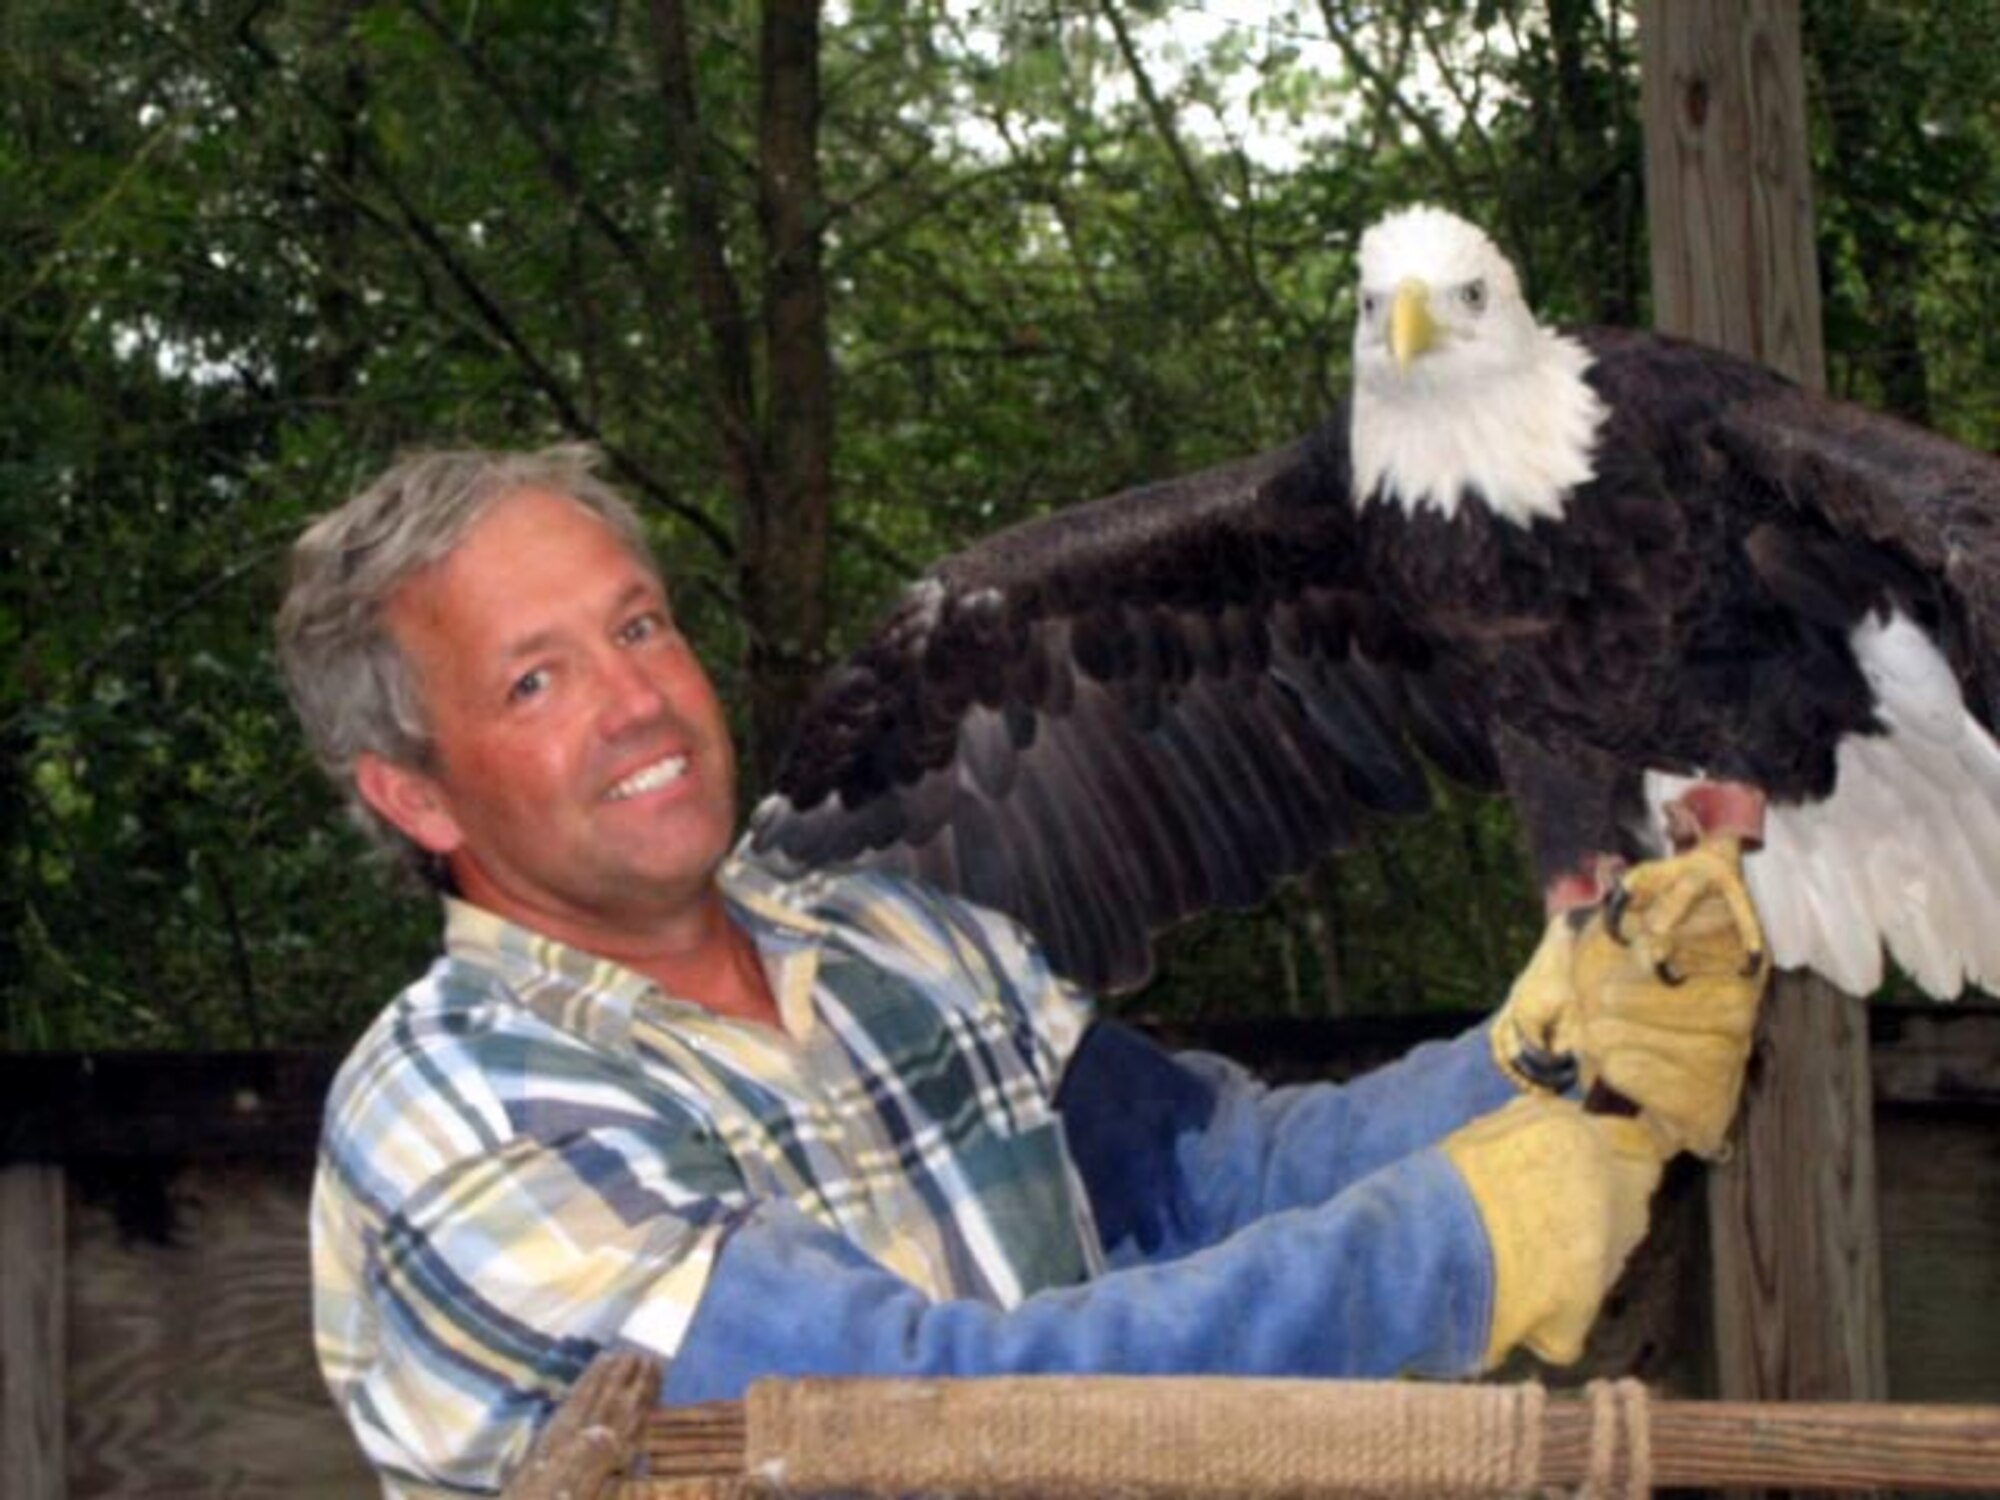 Jim Hartwell, 605th Test and Evaluation Squadron, holds an American Bald Eagle at the Big Bend Sanctuary.  He was recently awarded the NPS Award. (Courtesy Photo)